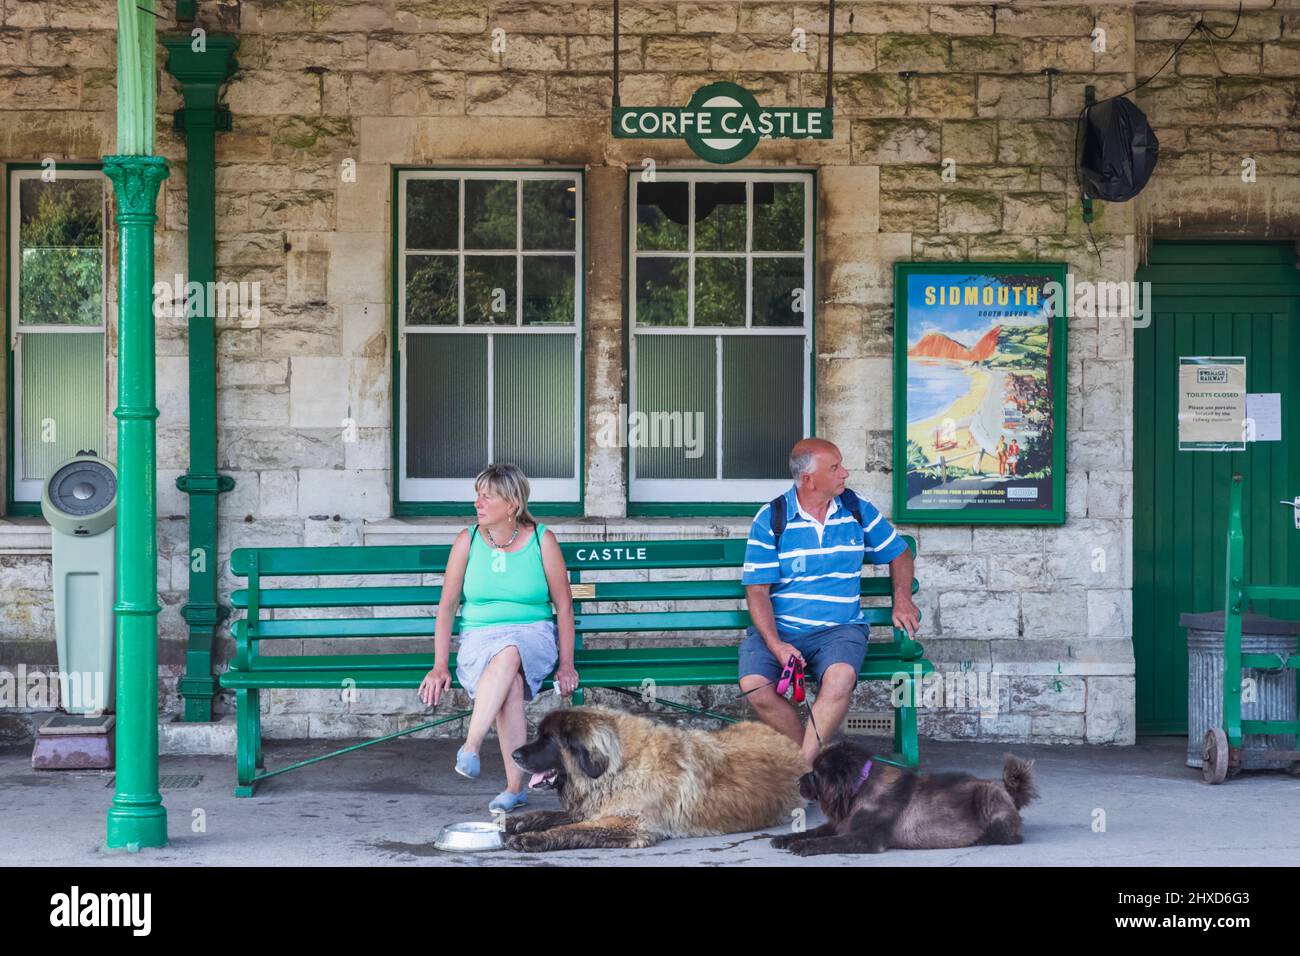 England, Dorset, Isle of Purbeck, Corfe Castle, The Historic Railway Station, Passengers with Dogs waitng on Platform for Train to Arrive Stock Photo